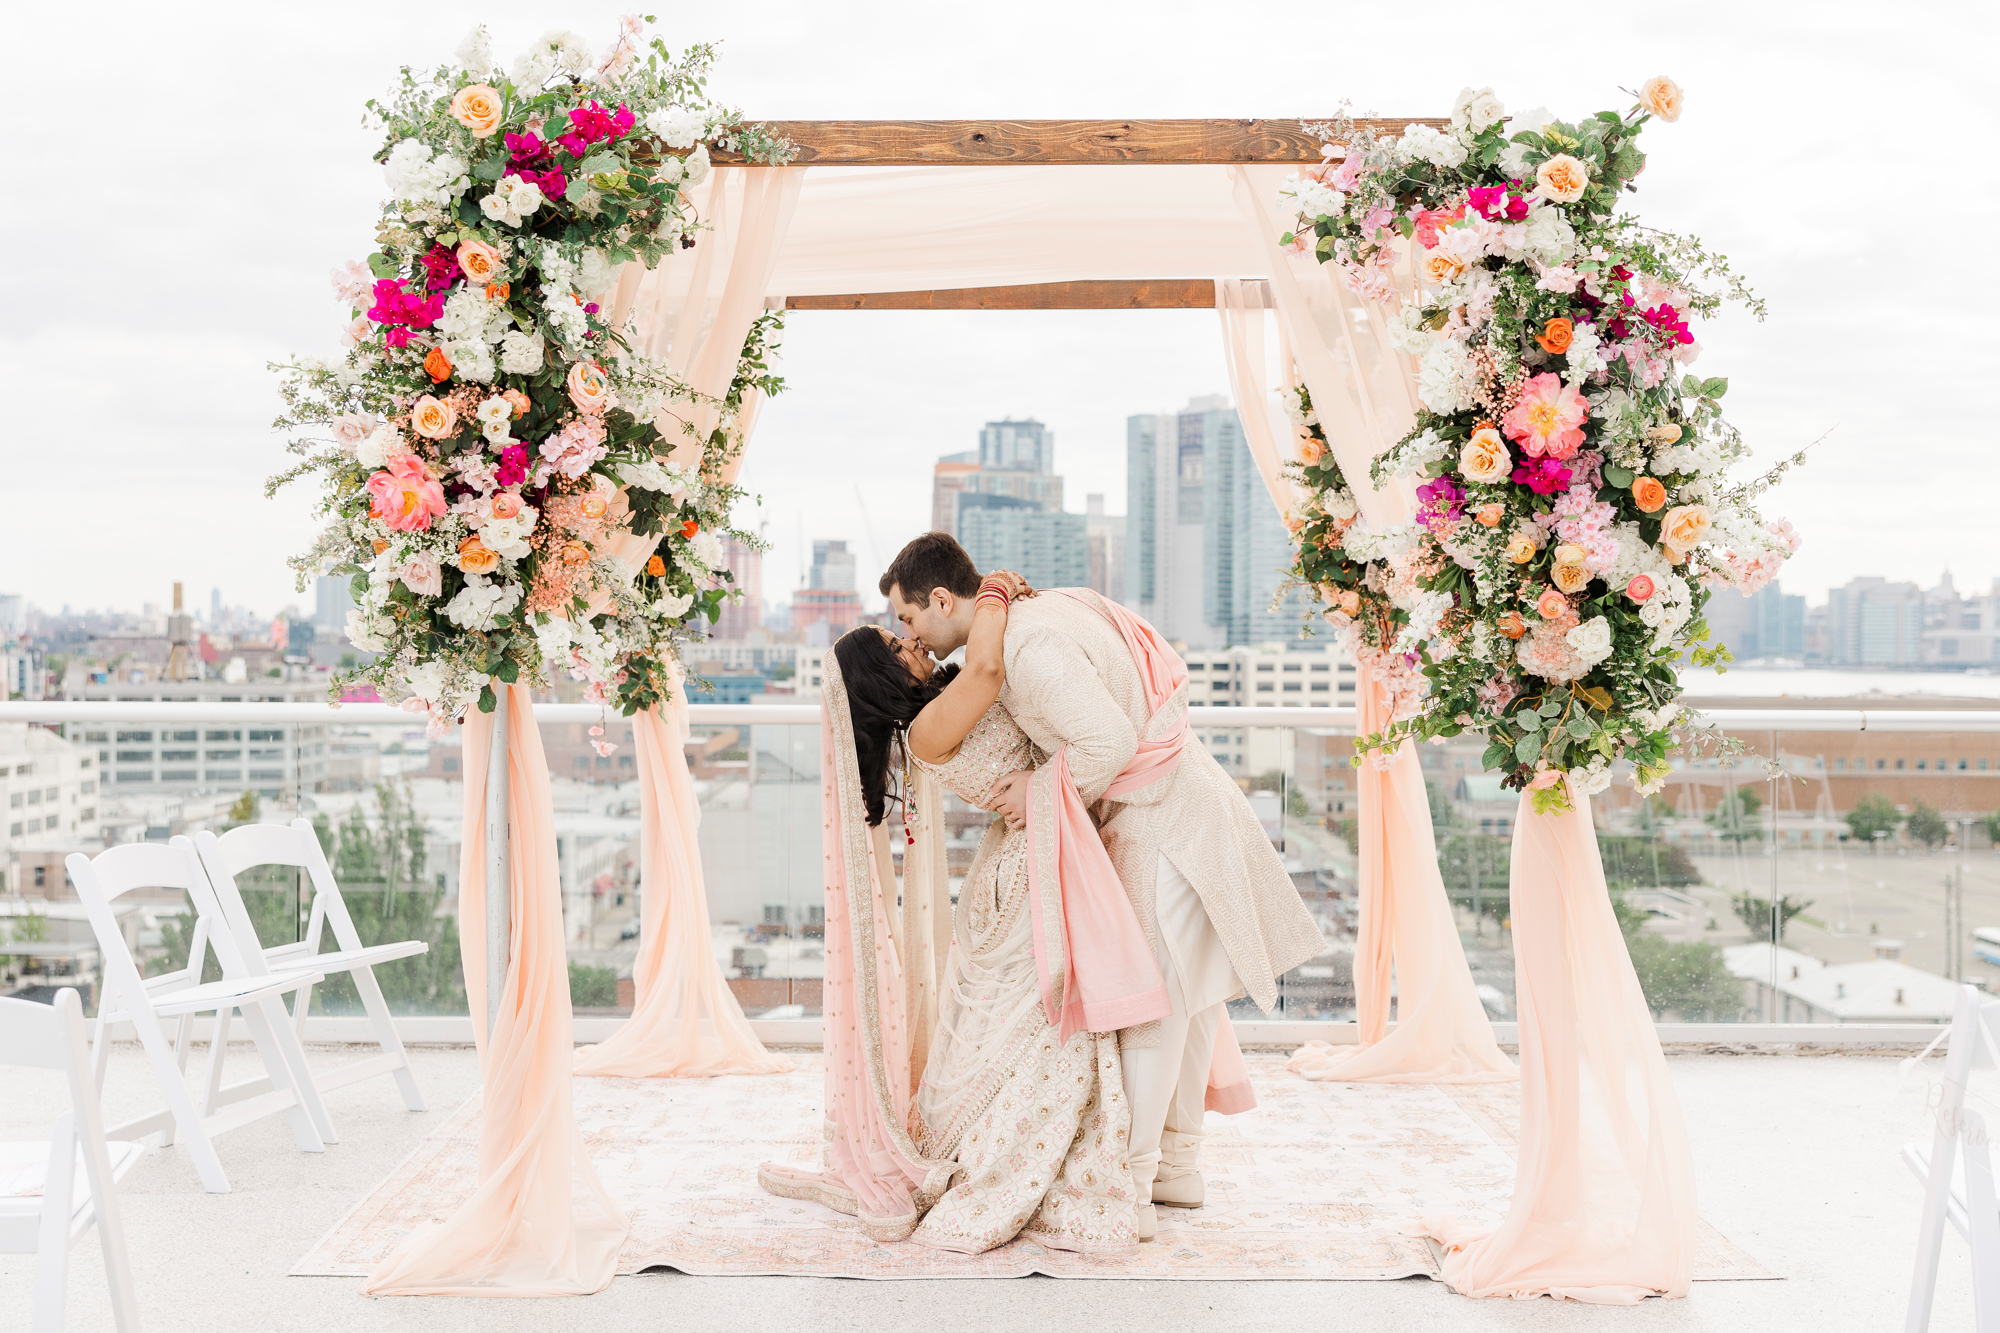 Iconic Ravel Hotel Wedding in a Peachy, Pastel Palette